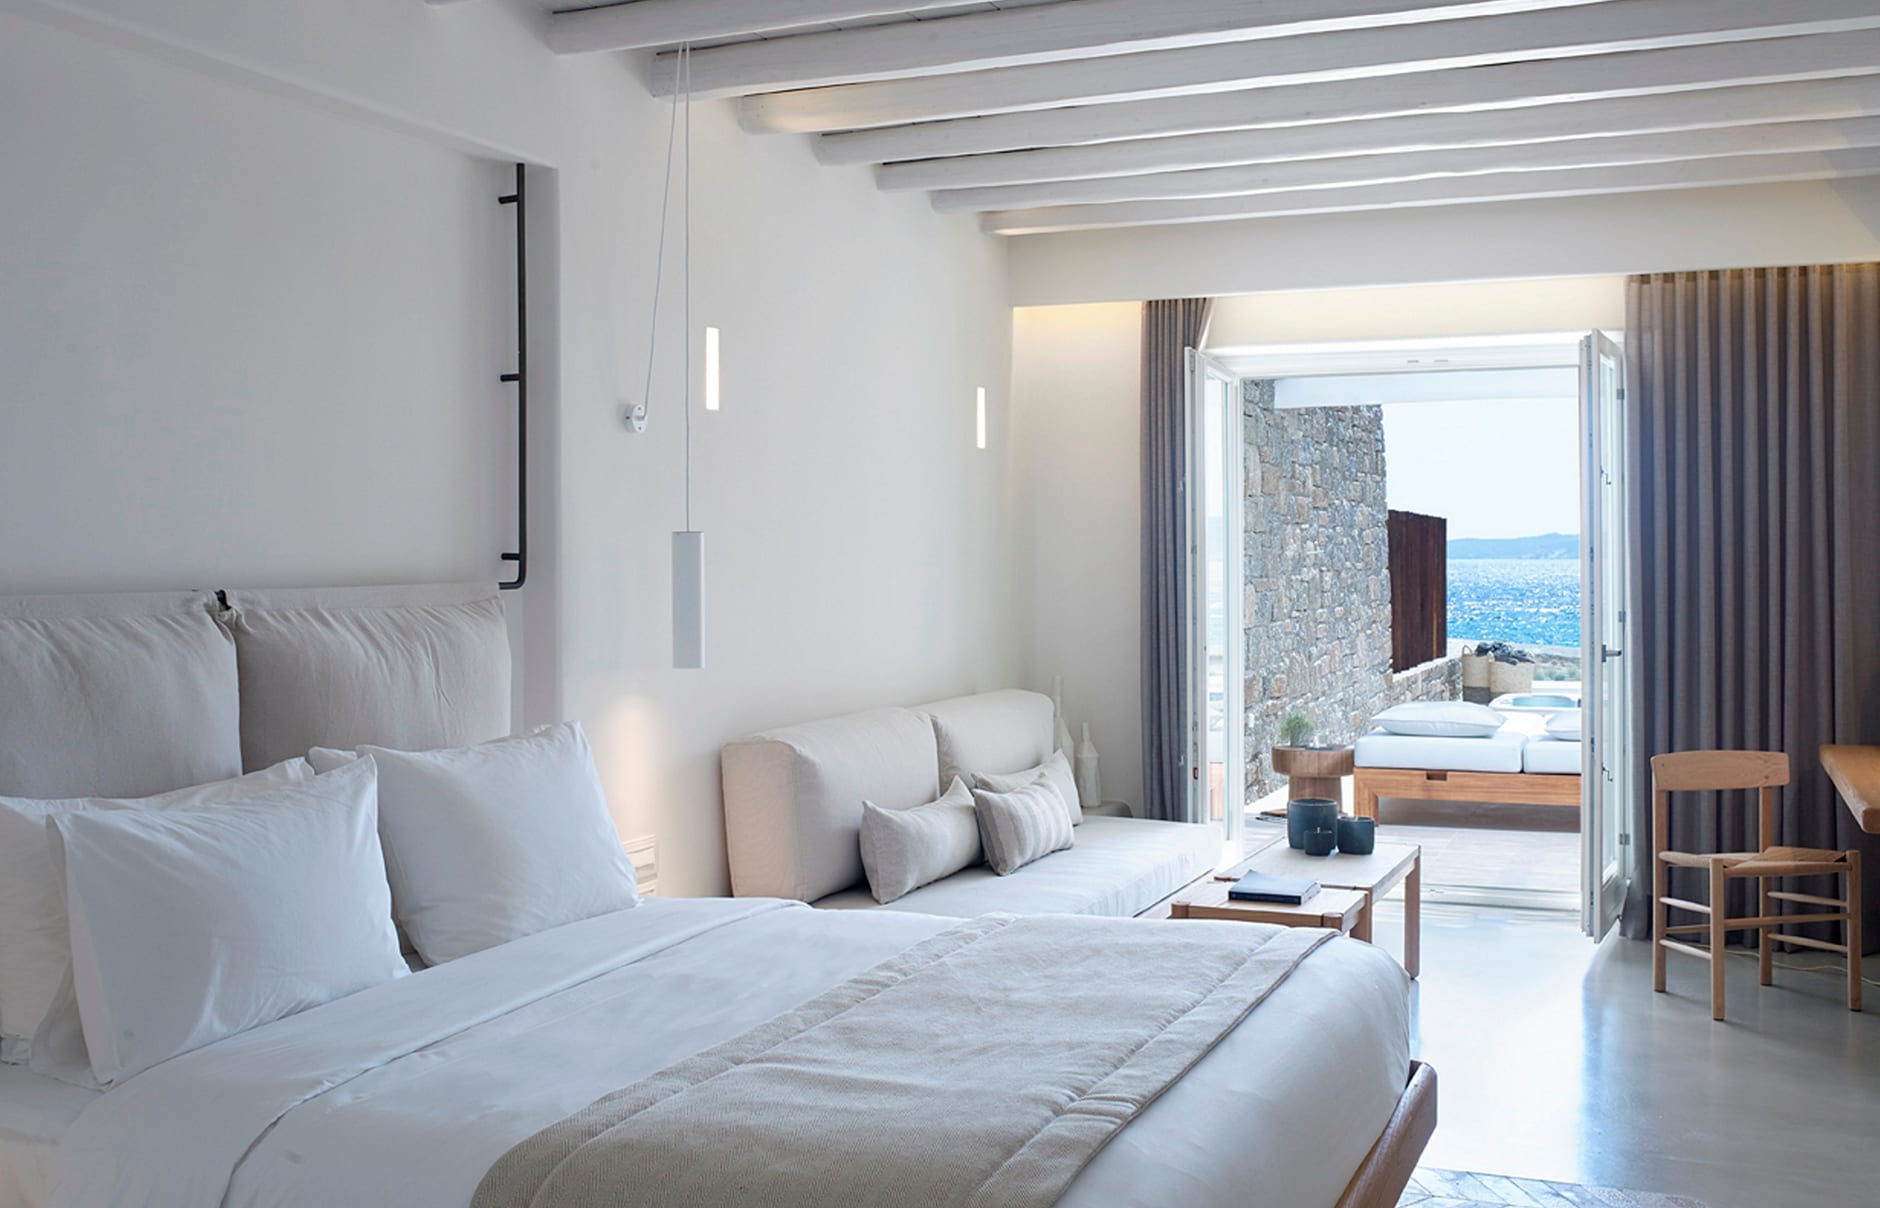 Deluxe Coast Suite. Bill & Coo Mykonos, Greece. Hotel Review by TravelPlusStyle. Photo © Bill & Coo Mykonos